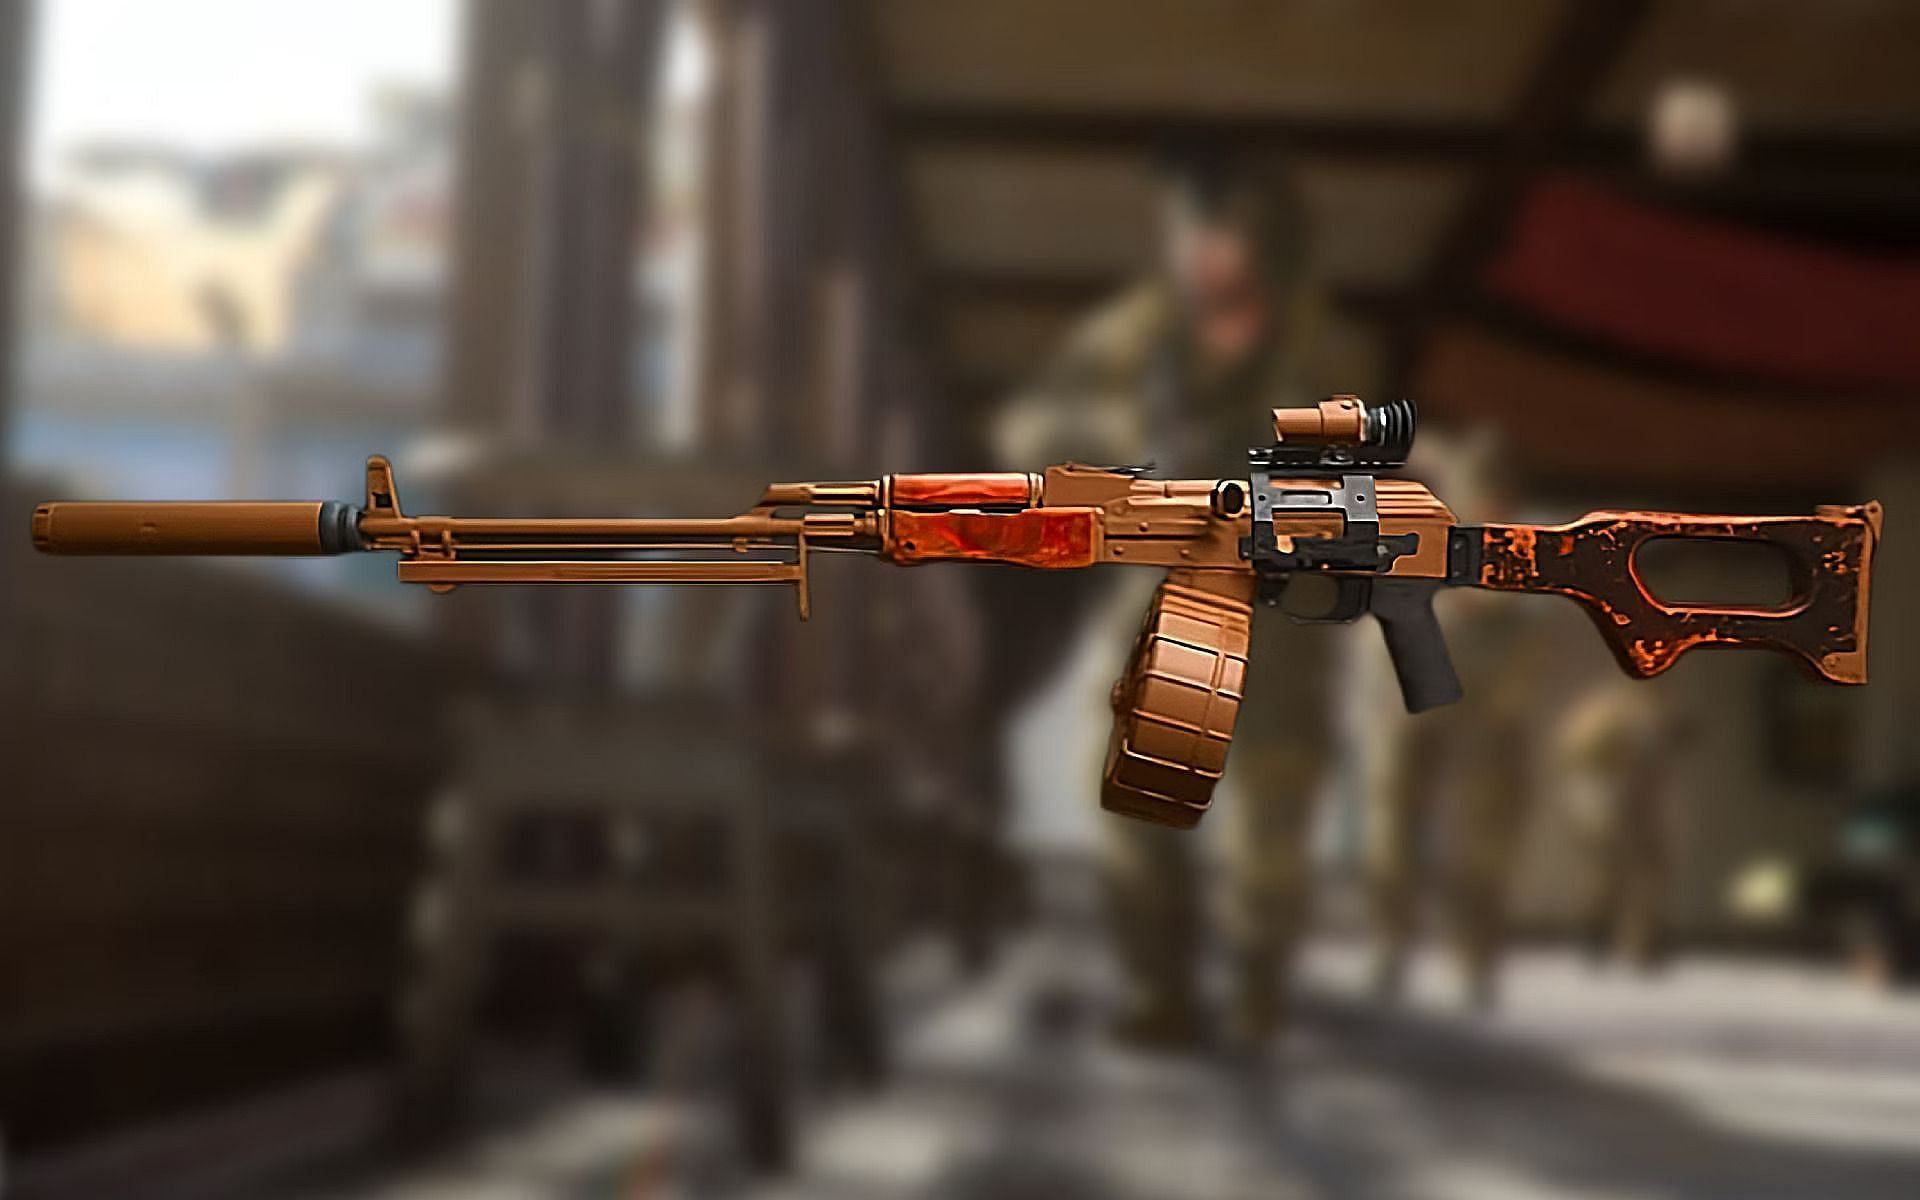 The RPK is still a beast in Warzone 2 despite the Season 2 nerf (Image via Activision/Edited by Sportskeeda)